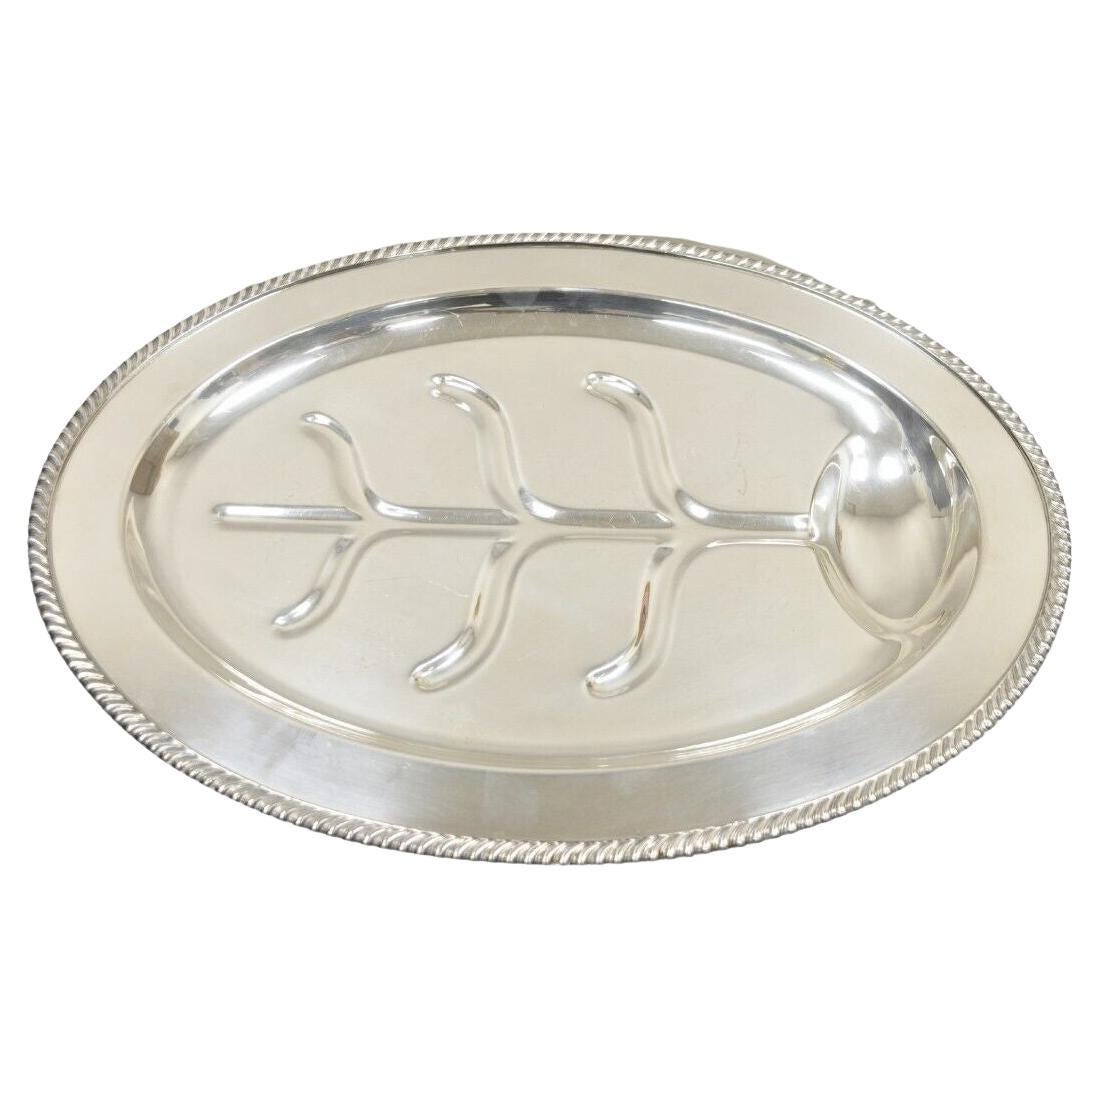 Antique English Regency Silver Plate Oval Meat Cutlery Serving Platter Tray Dish For Sale